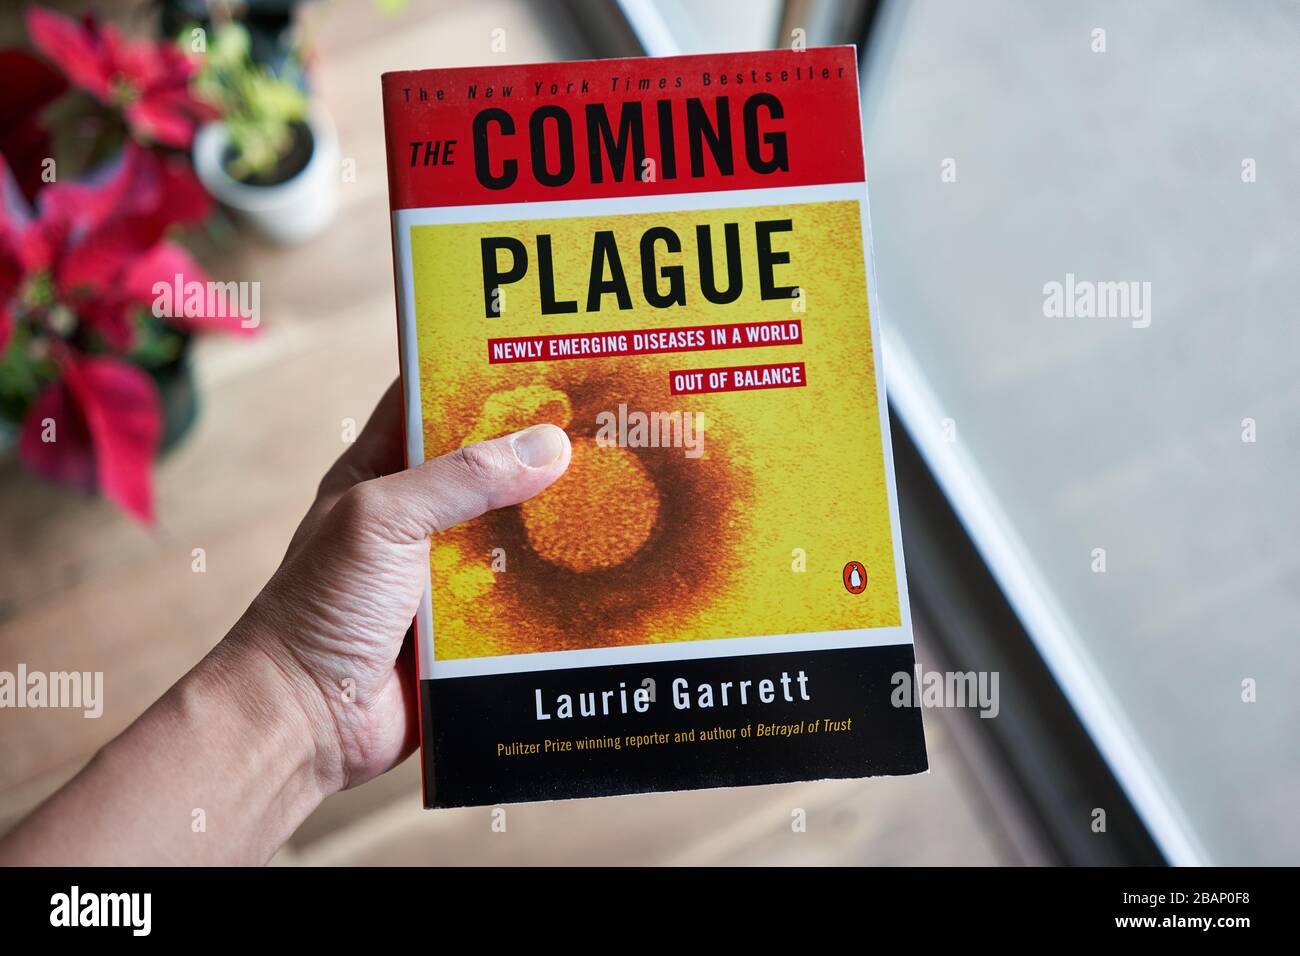 Hand holding the book 'The Coming Plague: Newly Emerging Diseases in a World Out of Balance' by Laurie Garrett, first published in 1994. Stock Photo